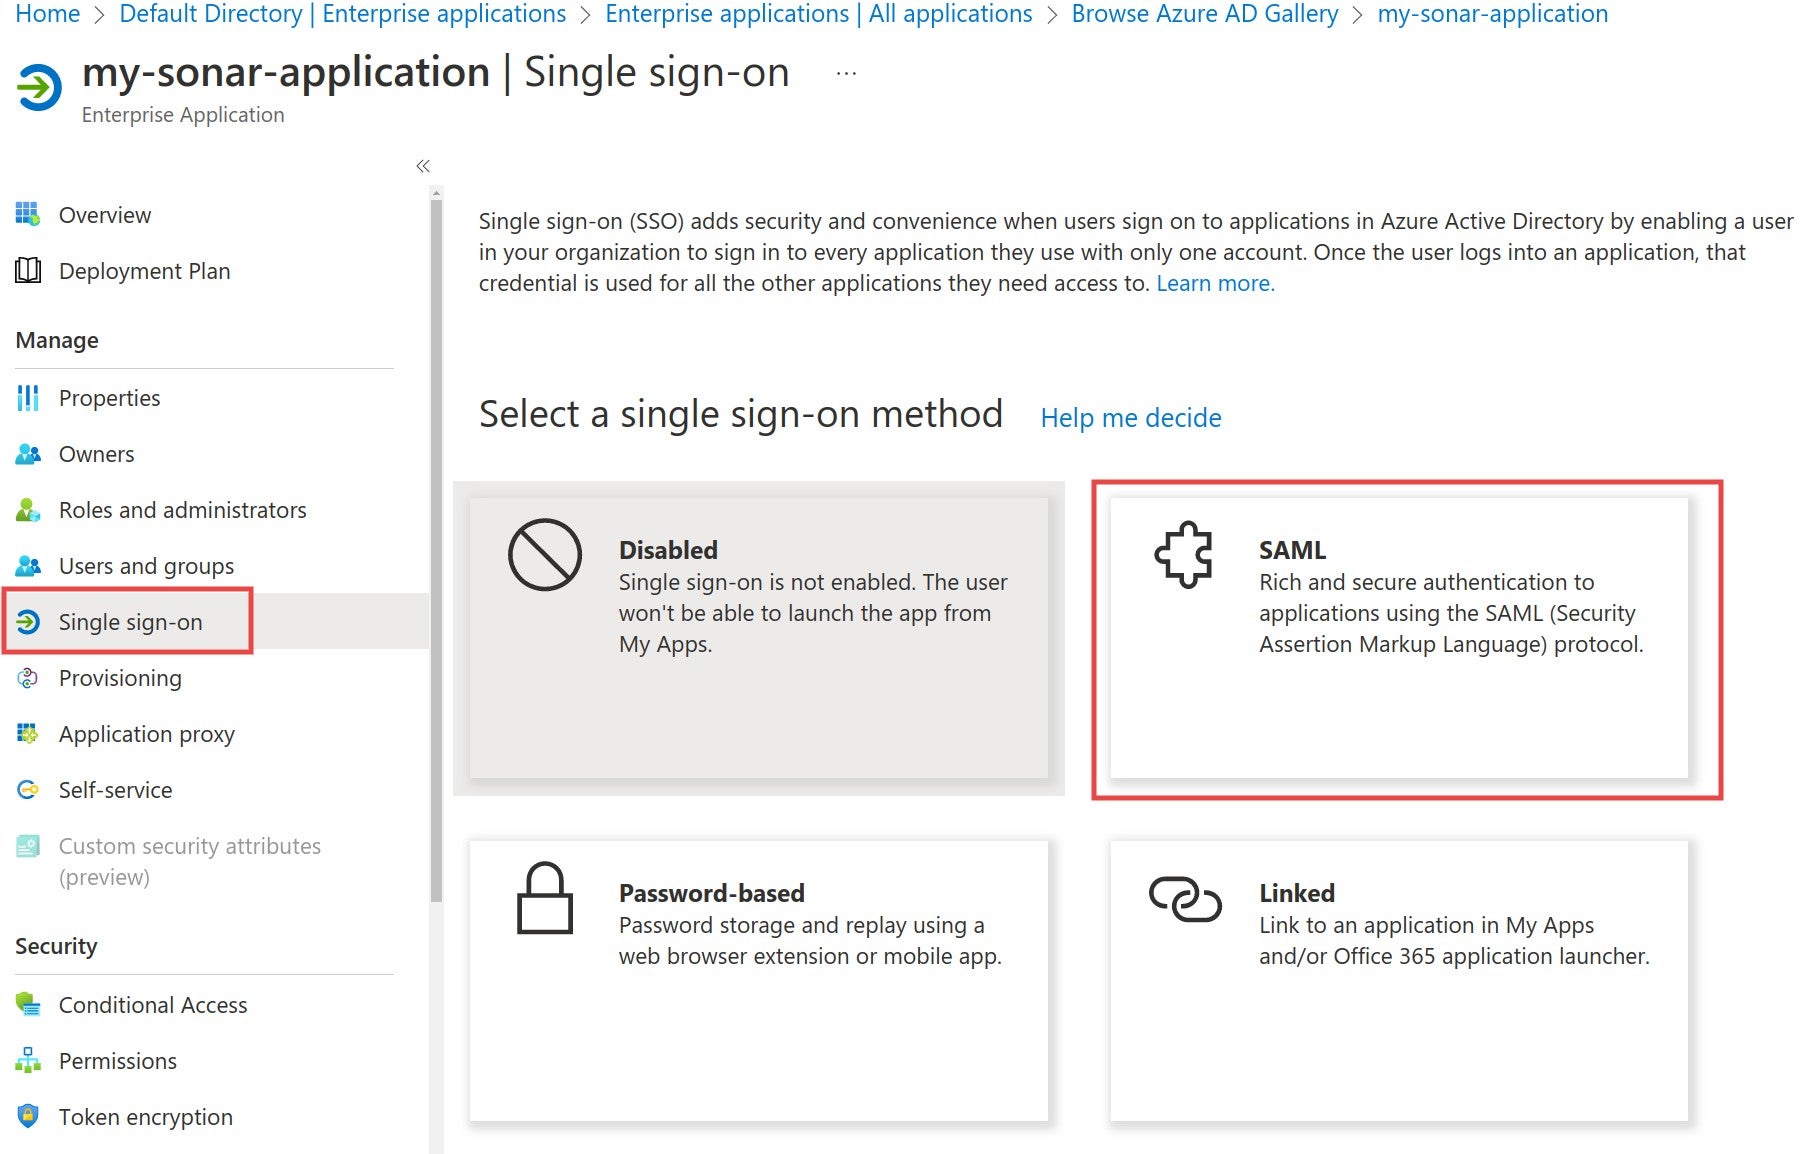 Navigate to Single sign-on in Azure and select SAML to begin the authentication process.